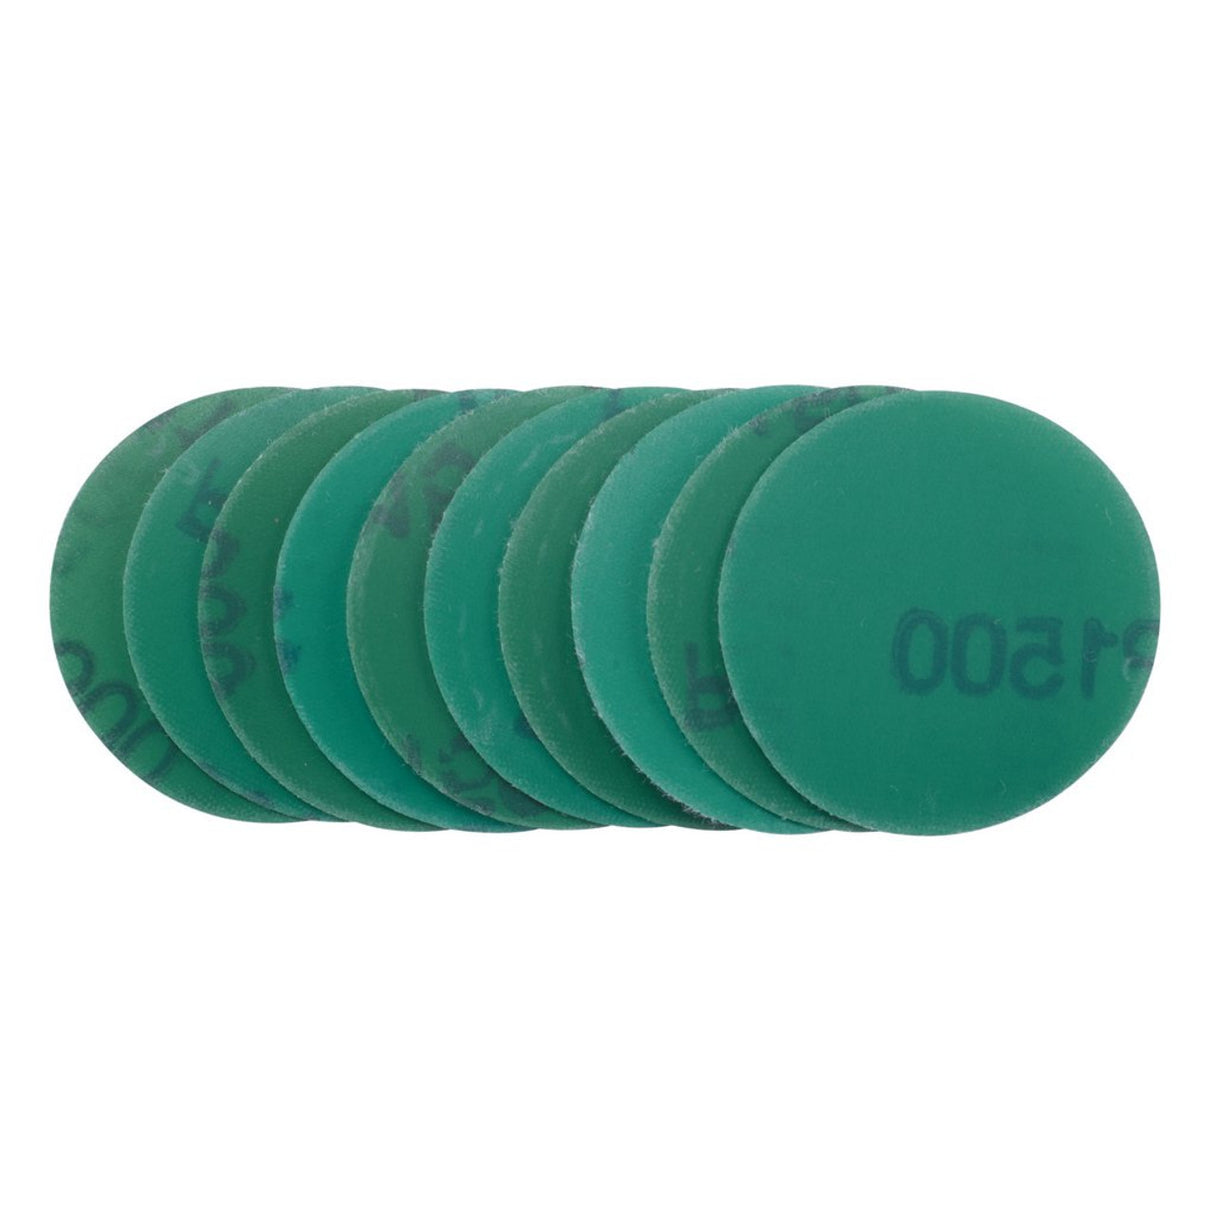 Draper Tools Wet And Dry Sanding Discs With Hook And Loop, 50mm, 1500 Grit (Pack Of 10)